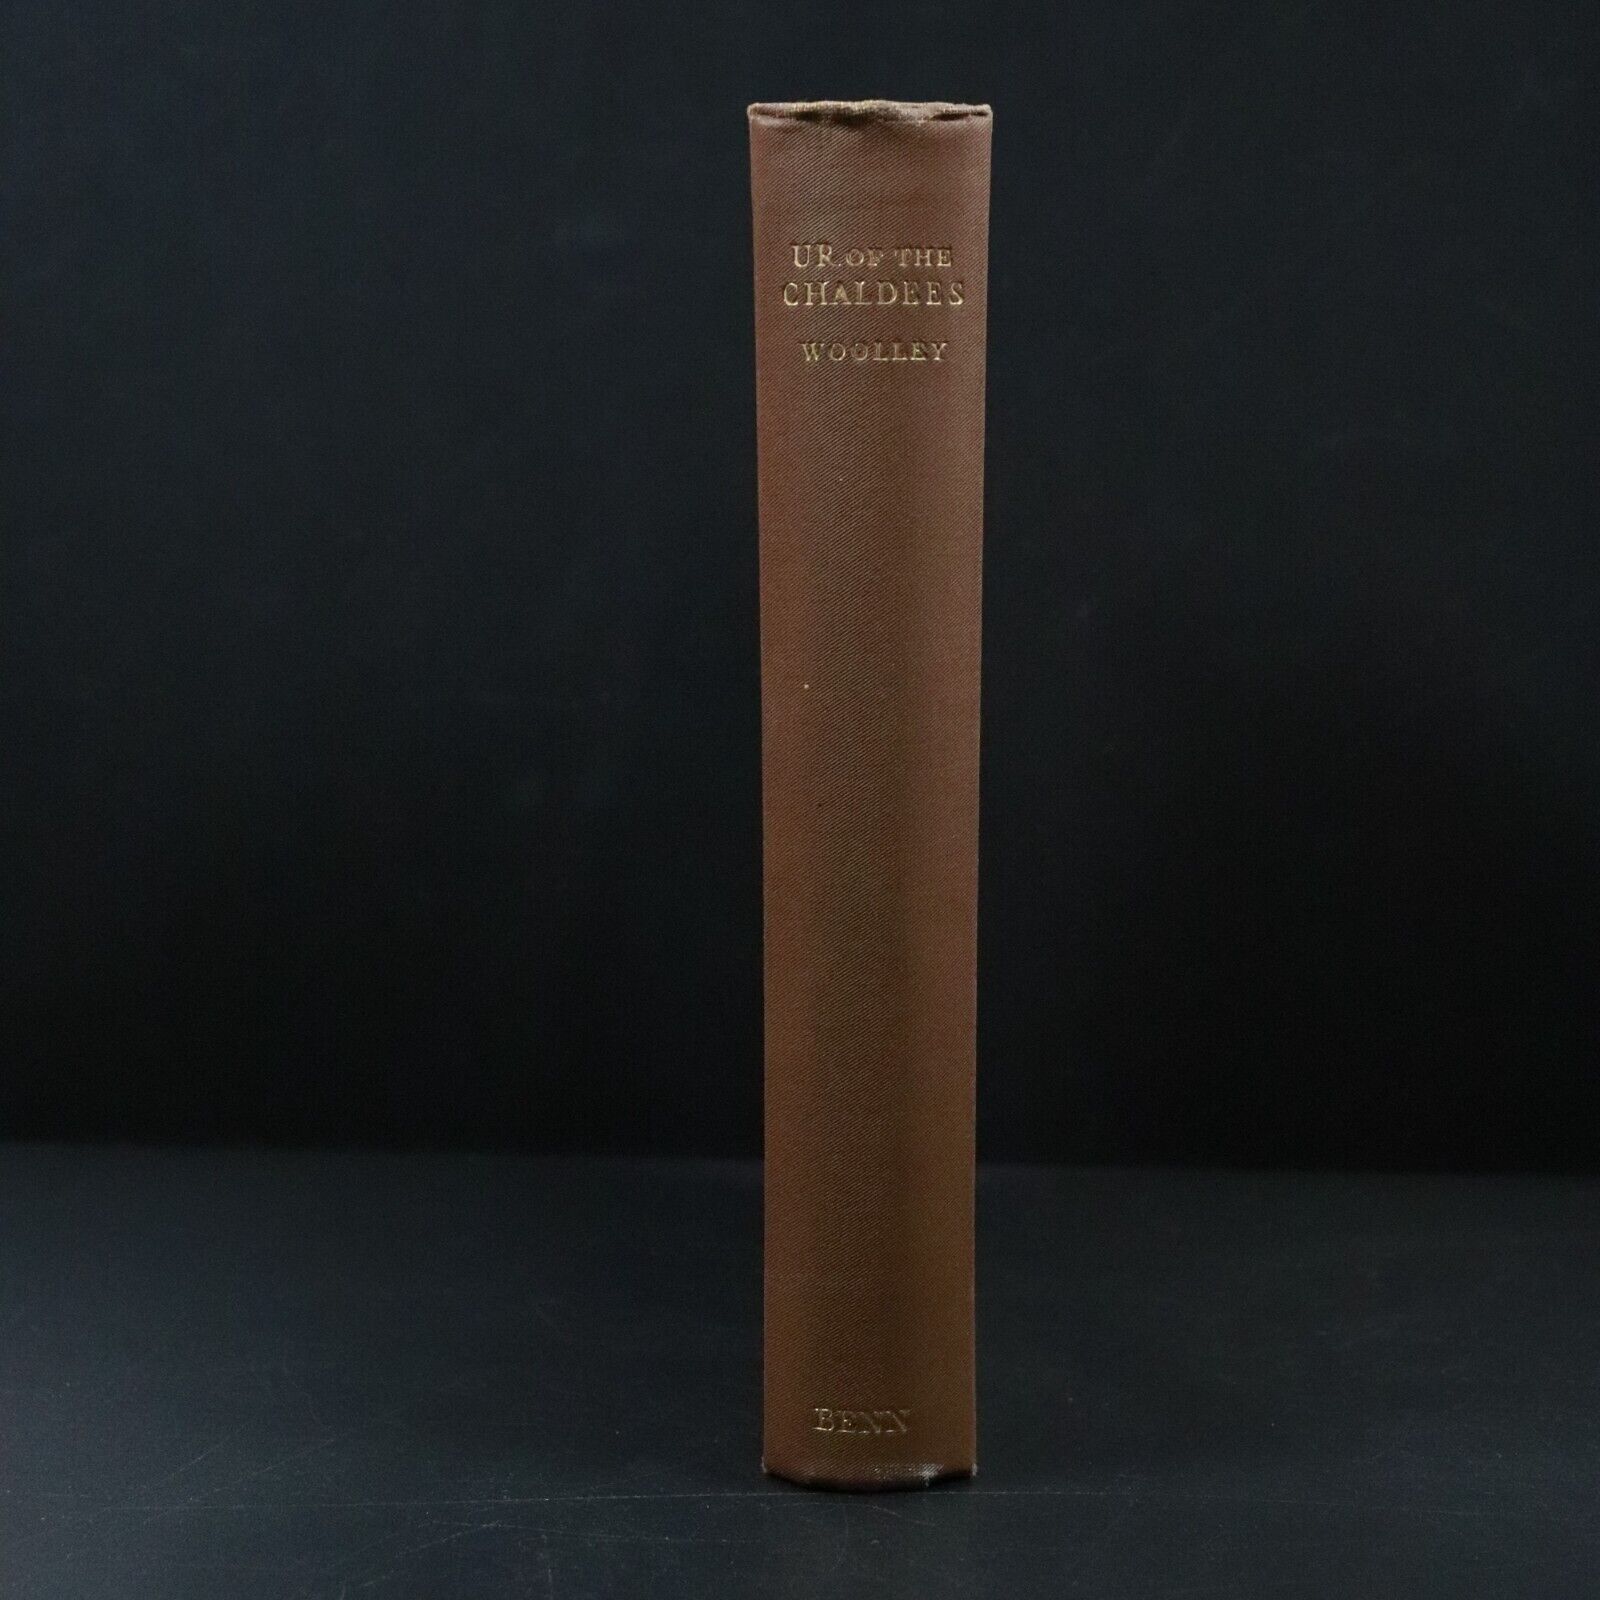 1931 Ur Of The Chaldees Seven Years Of Excavation Antique Archaeology Book